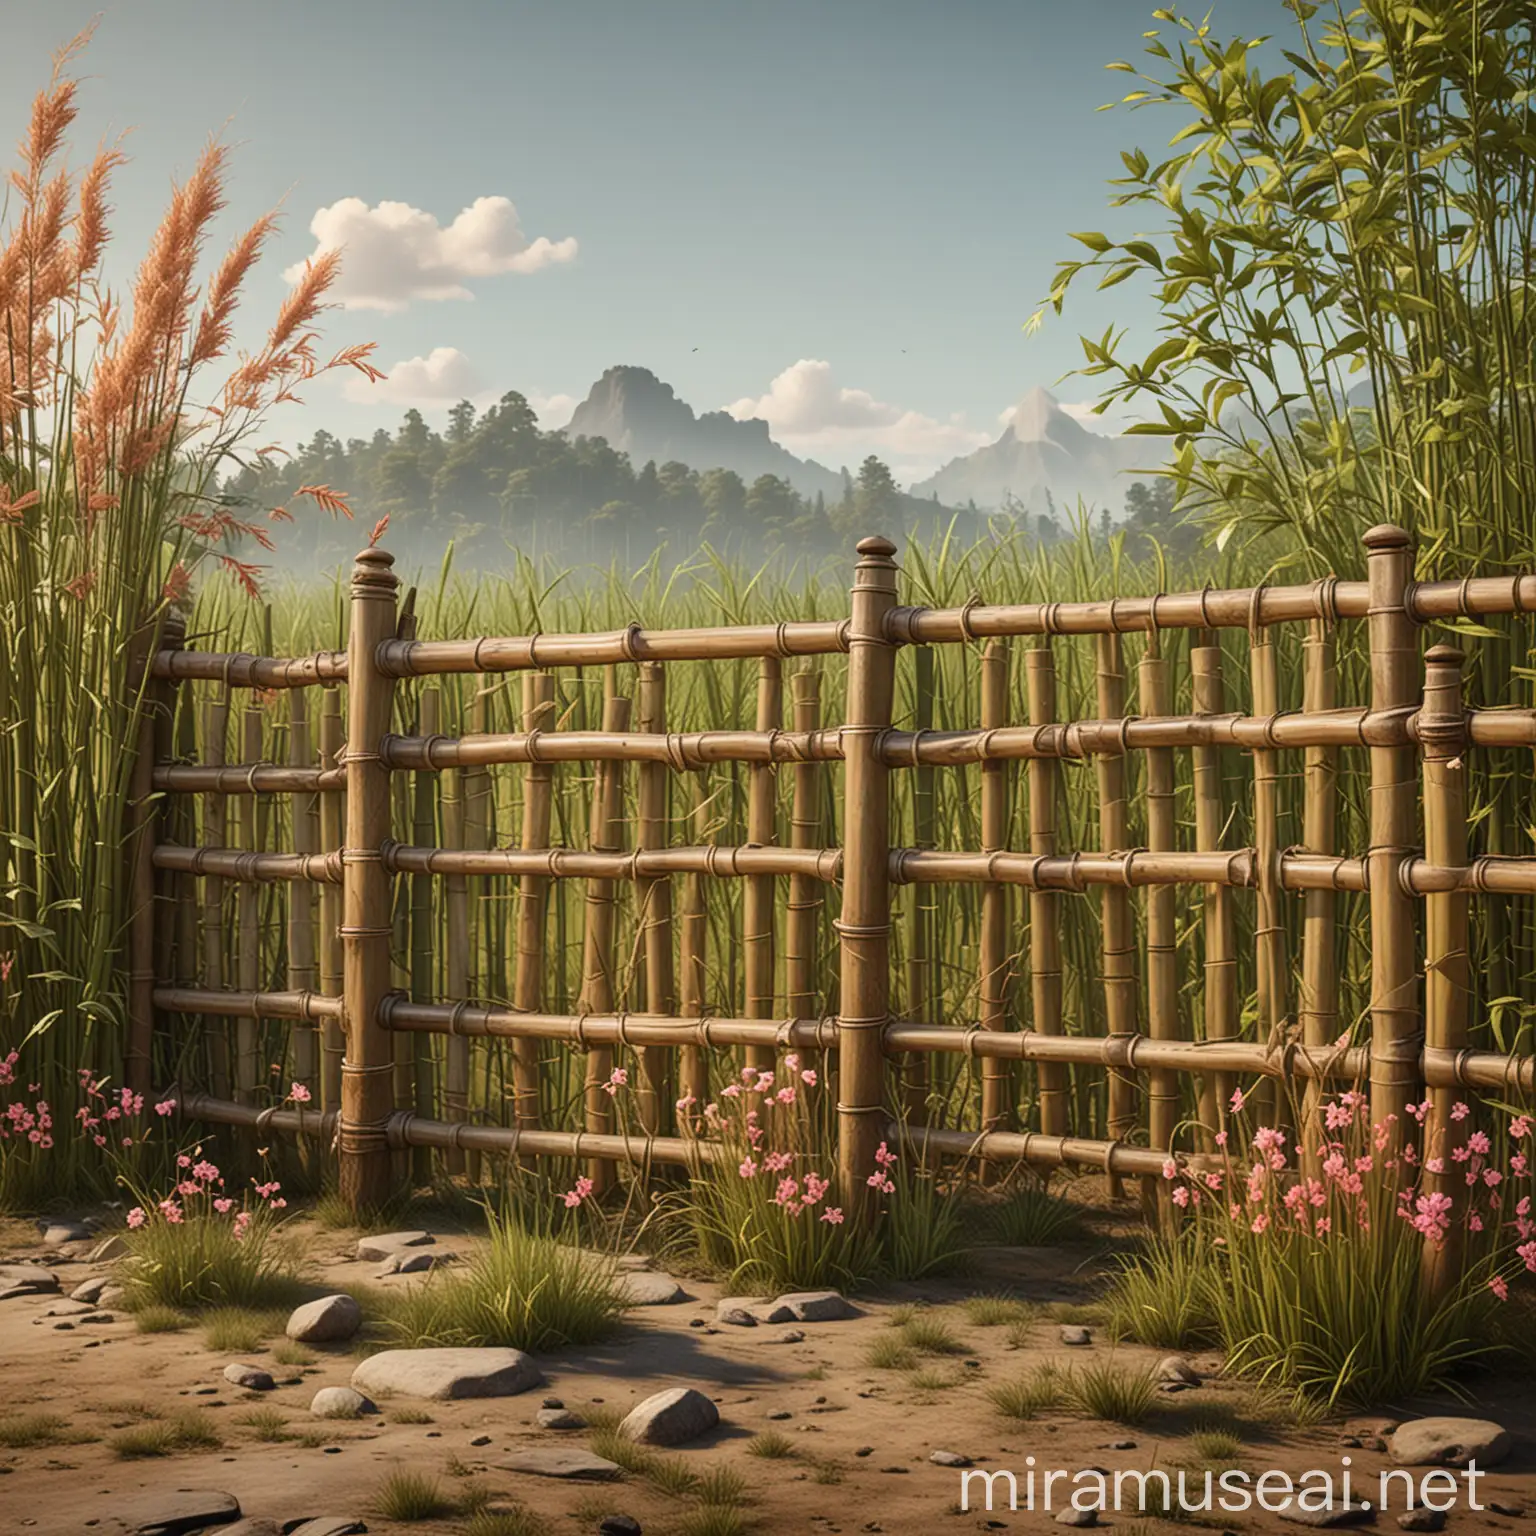 Create a detailed bamboo fence asset for a 2D game, inspired by the work of artist(s) Ivan Hoo, Rebecca Green, and Kyle T. Webster. The fence should be crafted from realistic bamboo with visible wire elements, designed to fit horizontally in a parallax view environment. The style should match the vibrant, pinkish-brown grass field and the overall aesthetic of the provided image. Display the fence on a 100% white background for easy integration. Ensure the design allows visibility through the fence to maintain the scenic background.